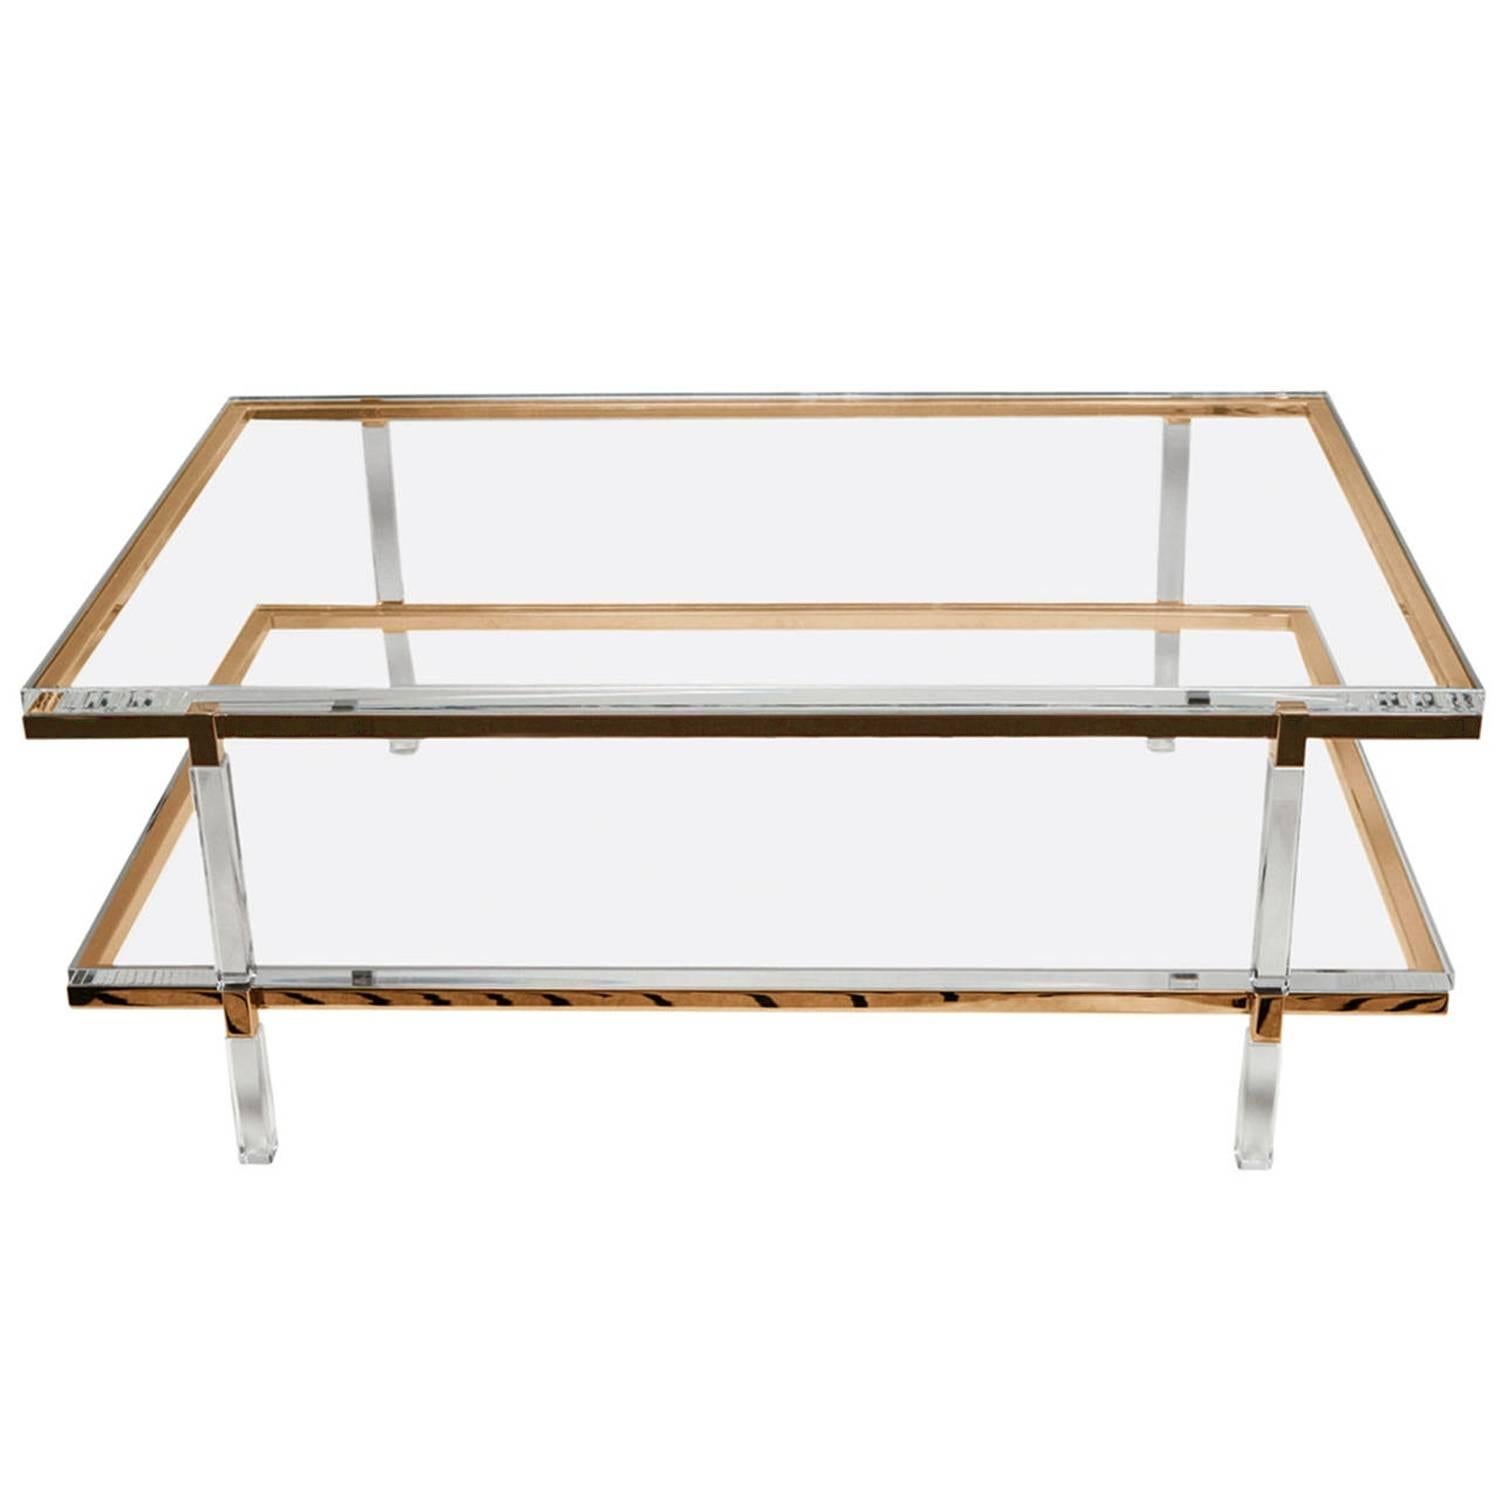 Two level coffee or cocktail table designed and manufactured by the icon of Lucite Charles Hollis Jones as part of the Metric collection designed in the 1960s.

The table is executed in Lucite and polished brass topped with a 1 1/4